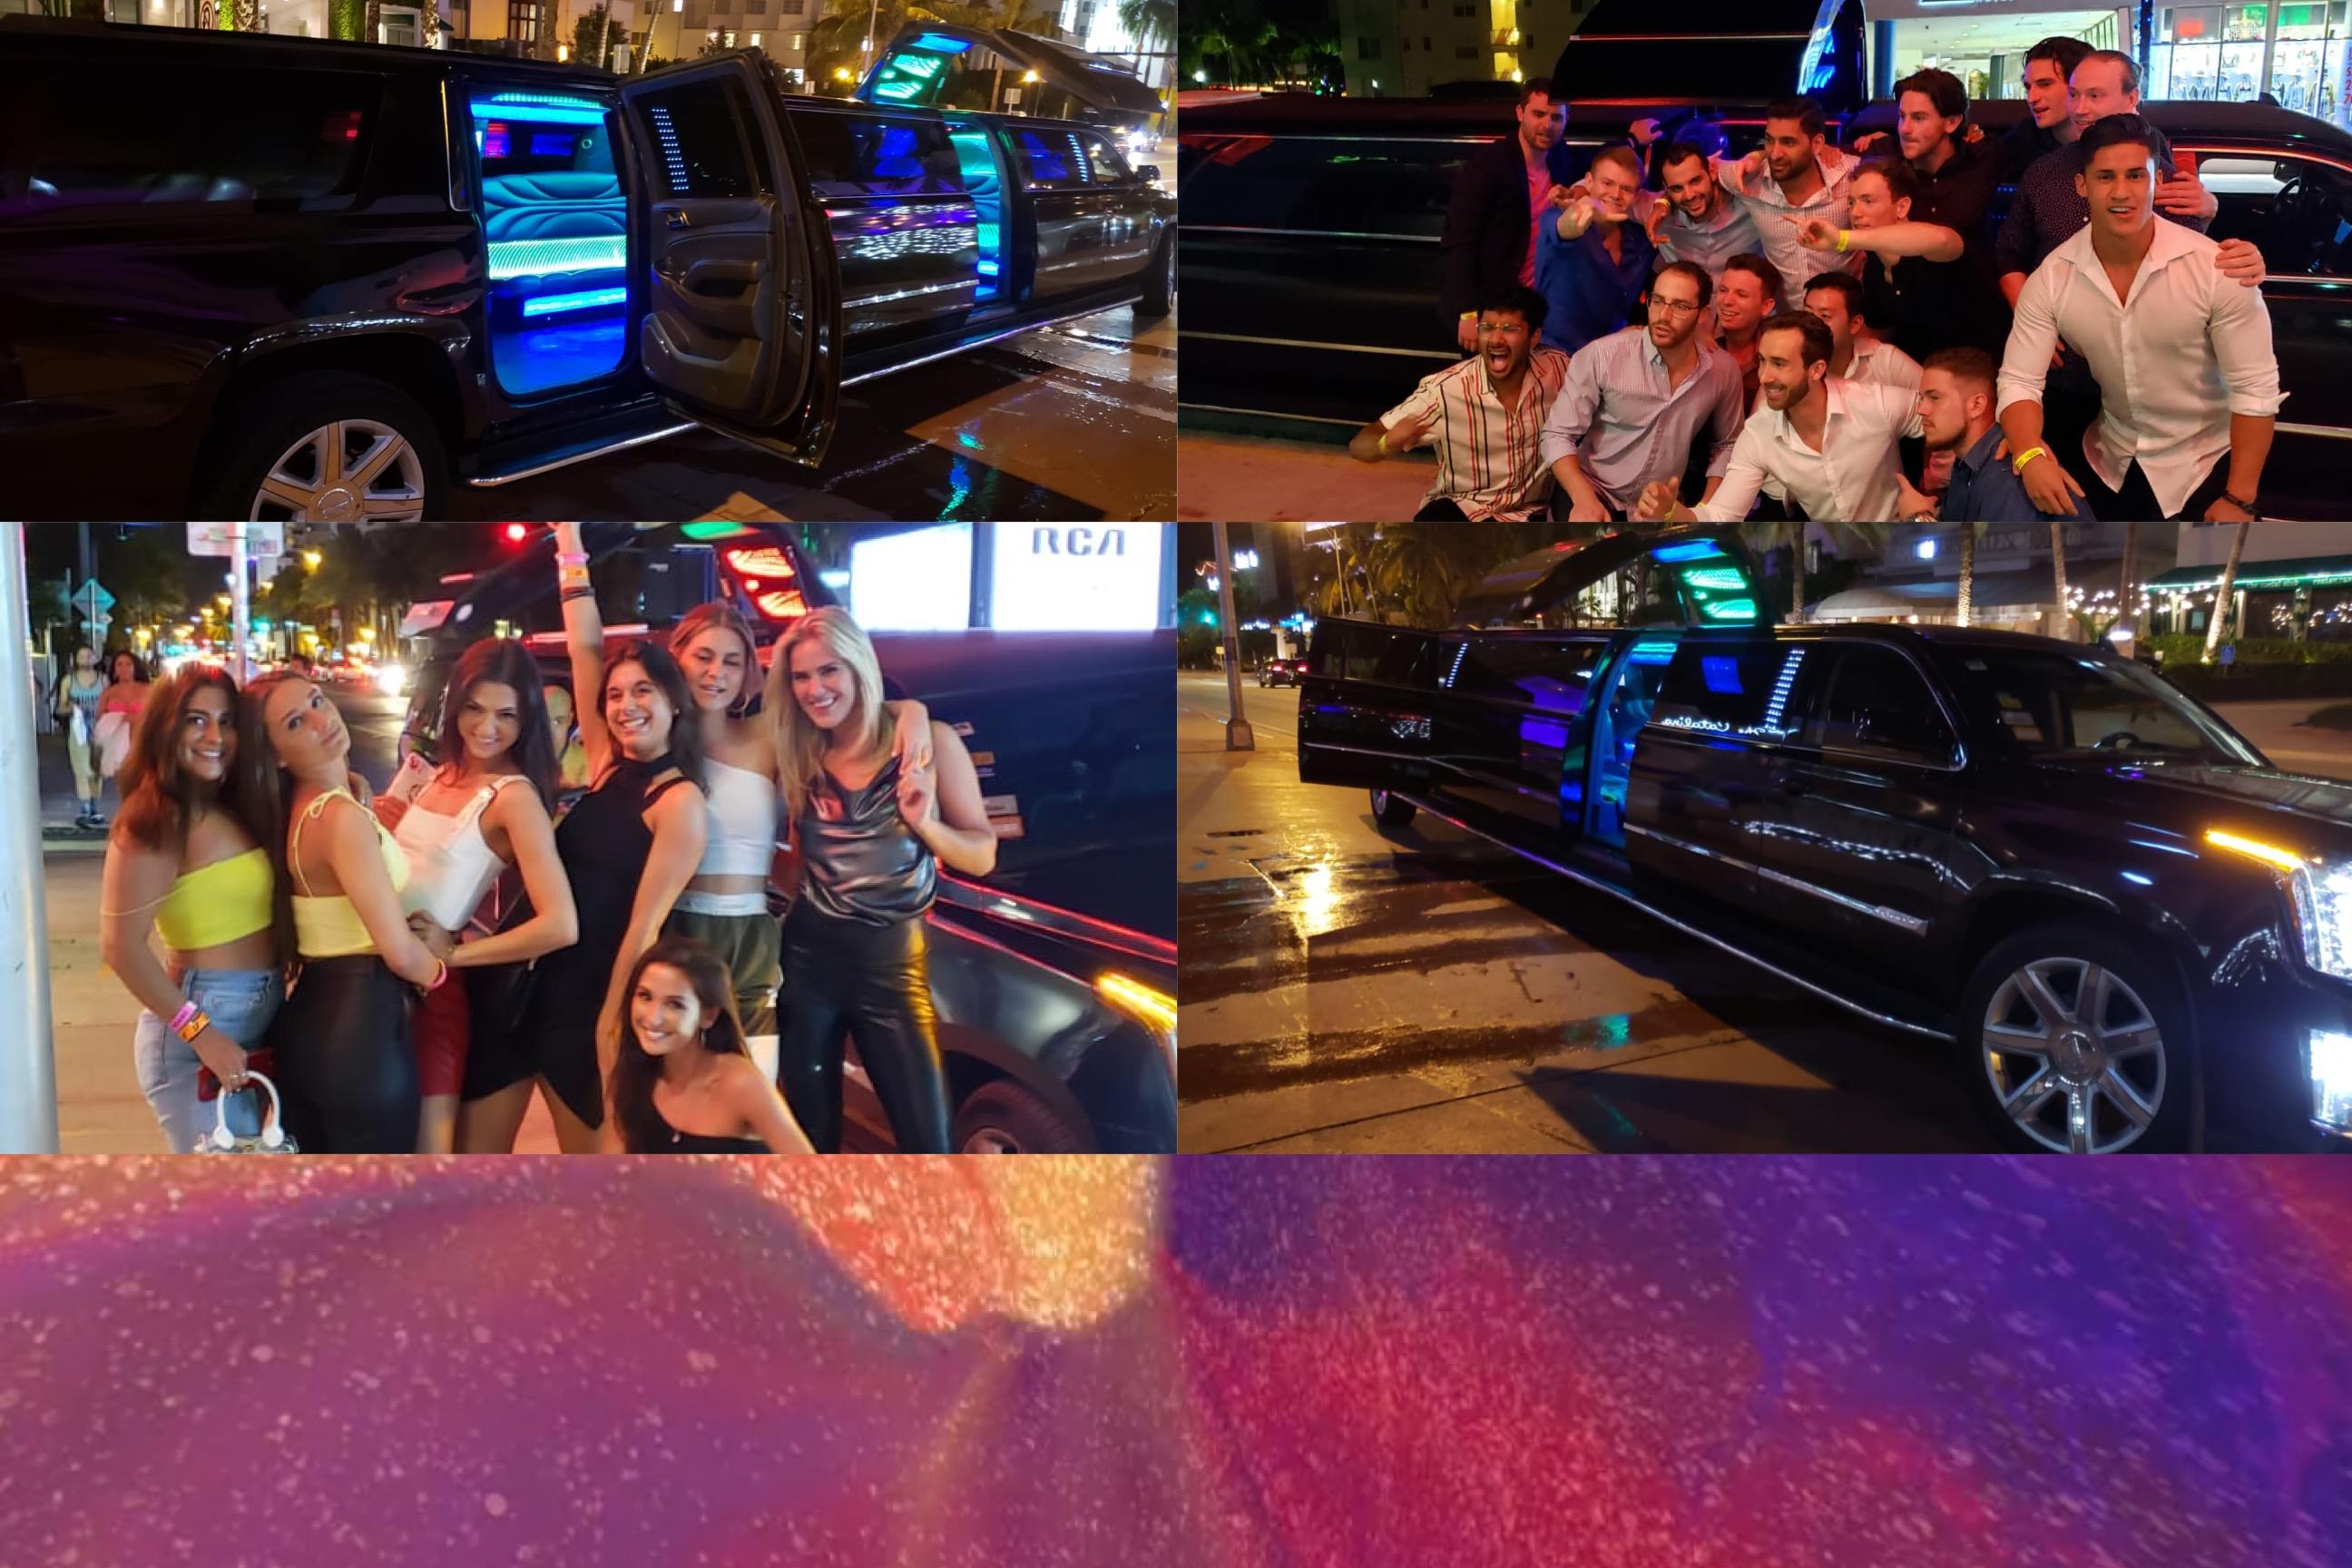 Miami VIP Nightclub Package 2 Hrs Premium Open Bar, Limo & Express Entry